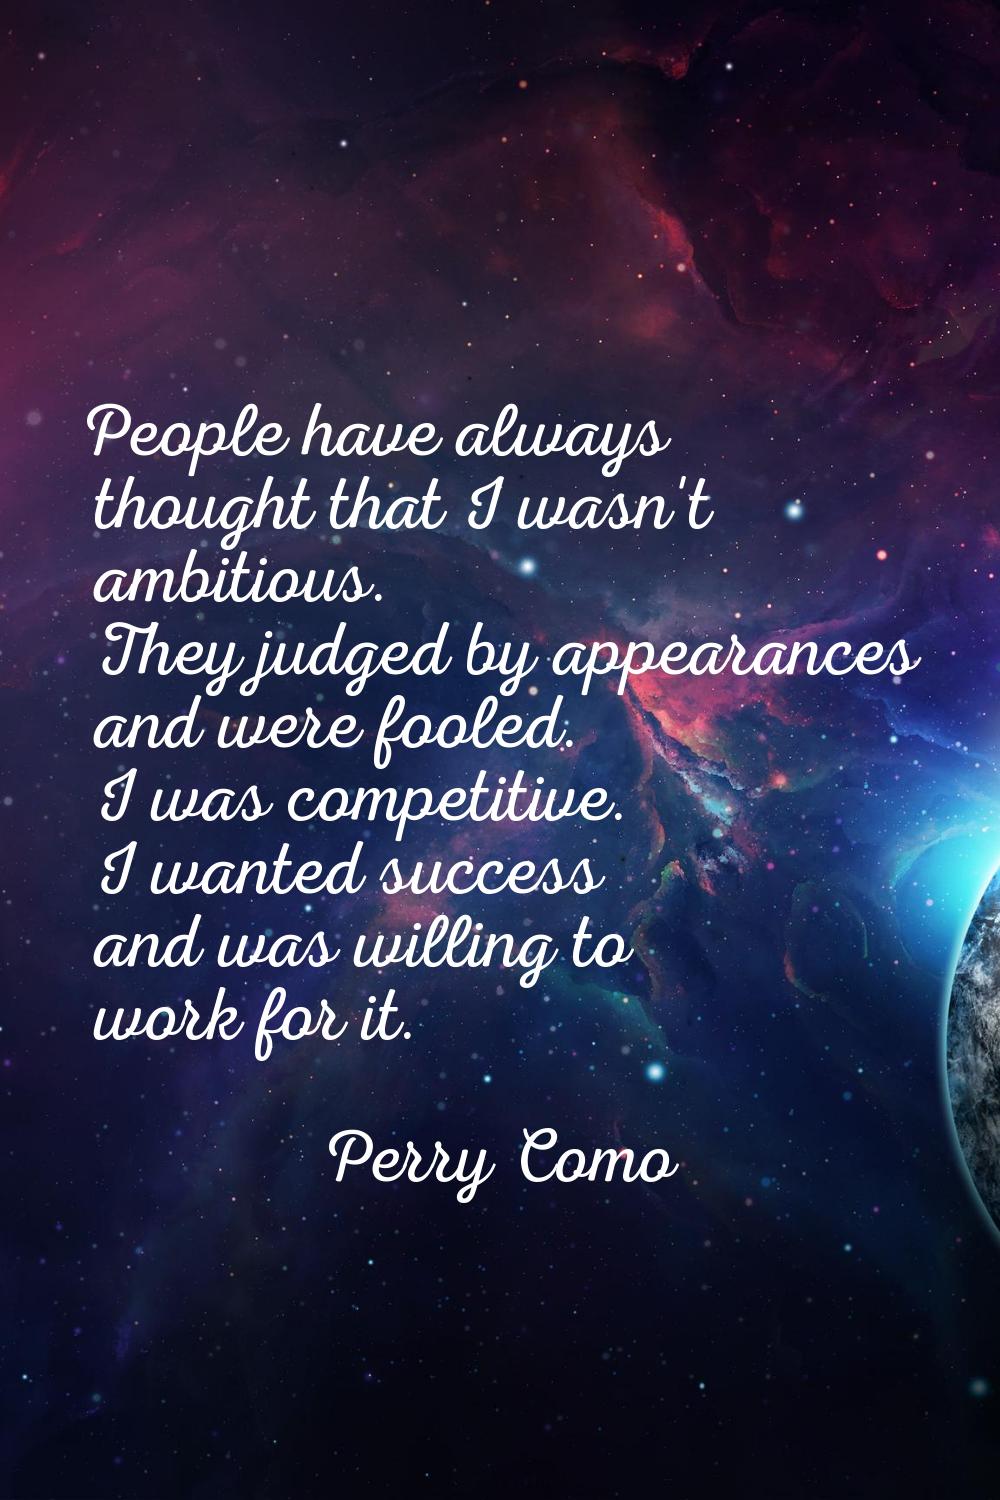 People have always thought that I wasn't ambitious. They judged by appearances and were fooled. I w